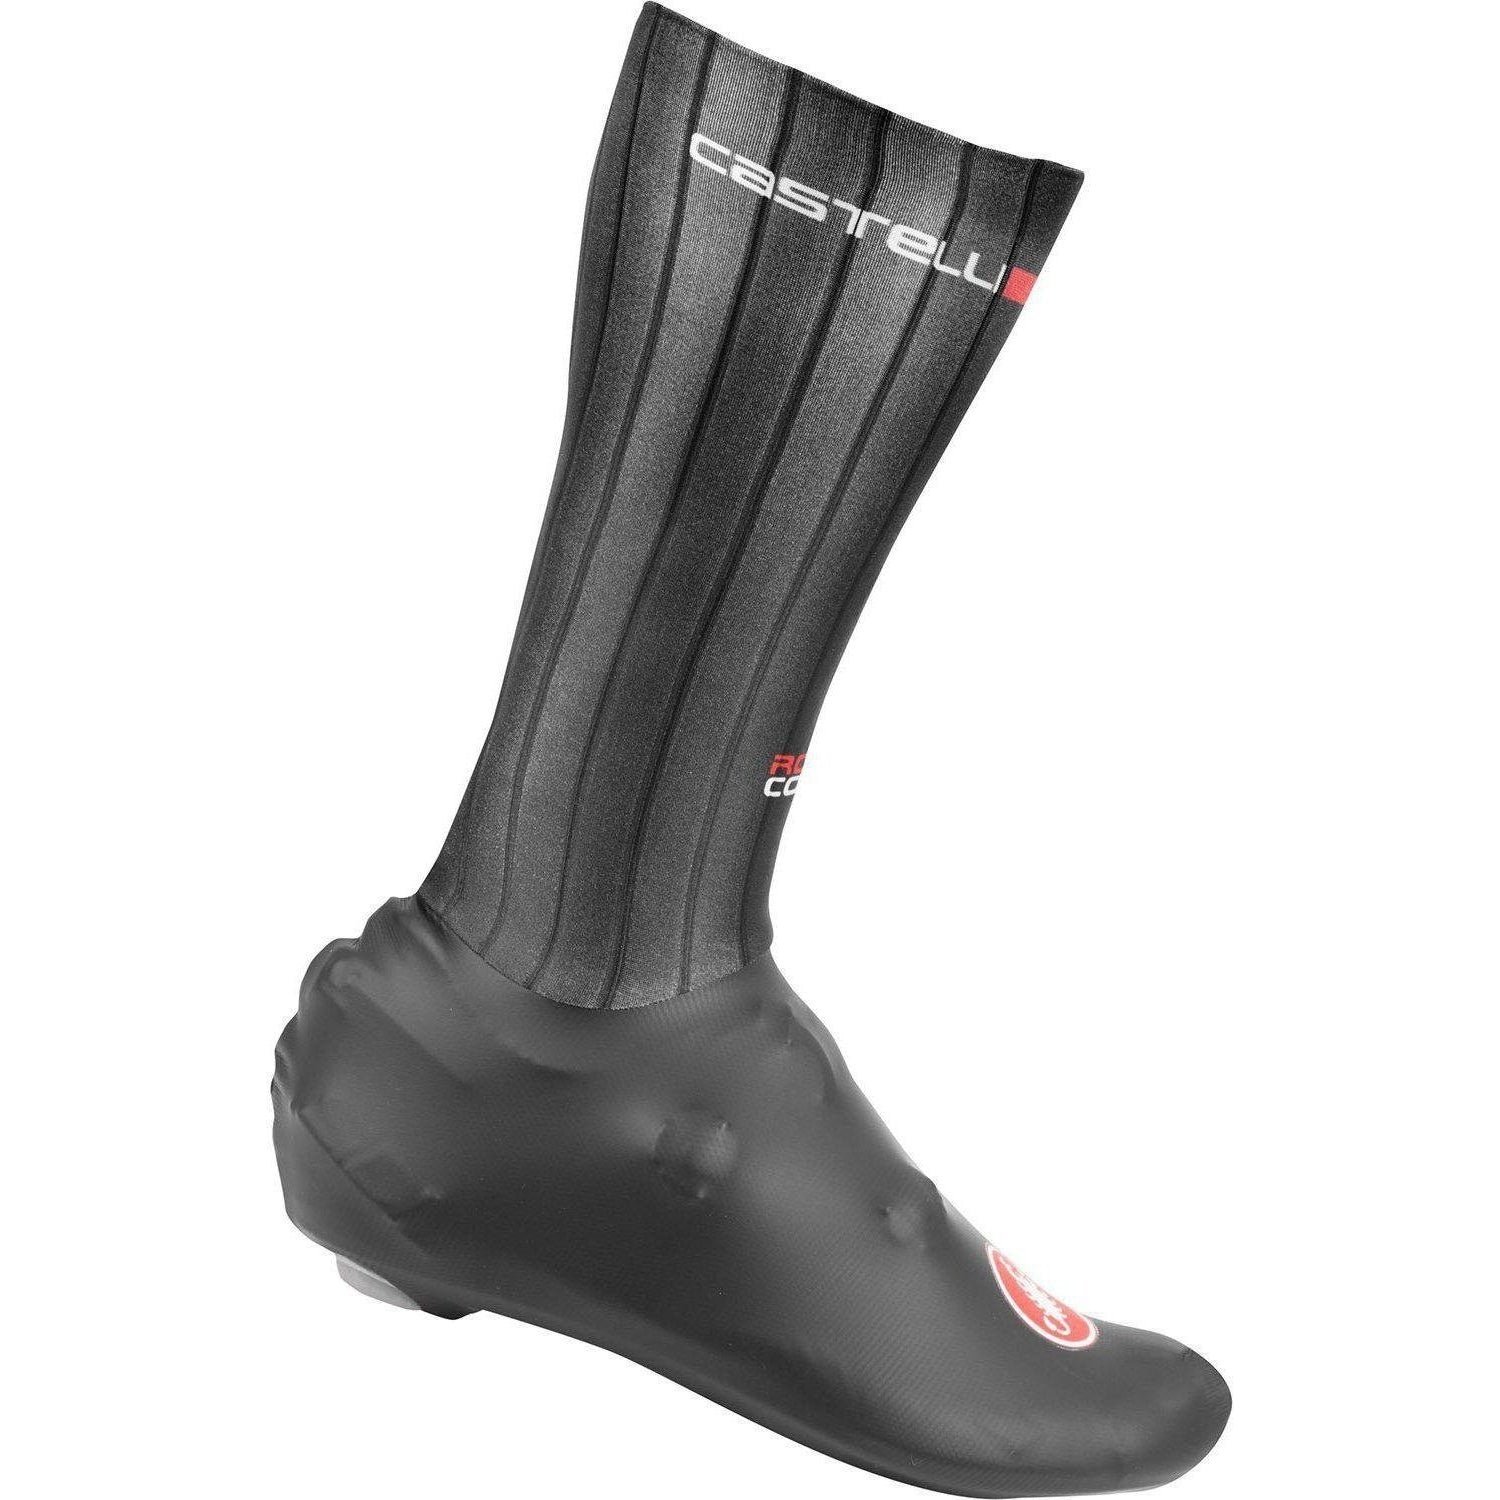 castelli cycling shoe covers